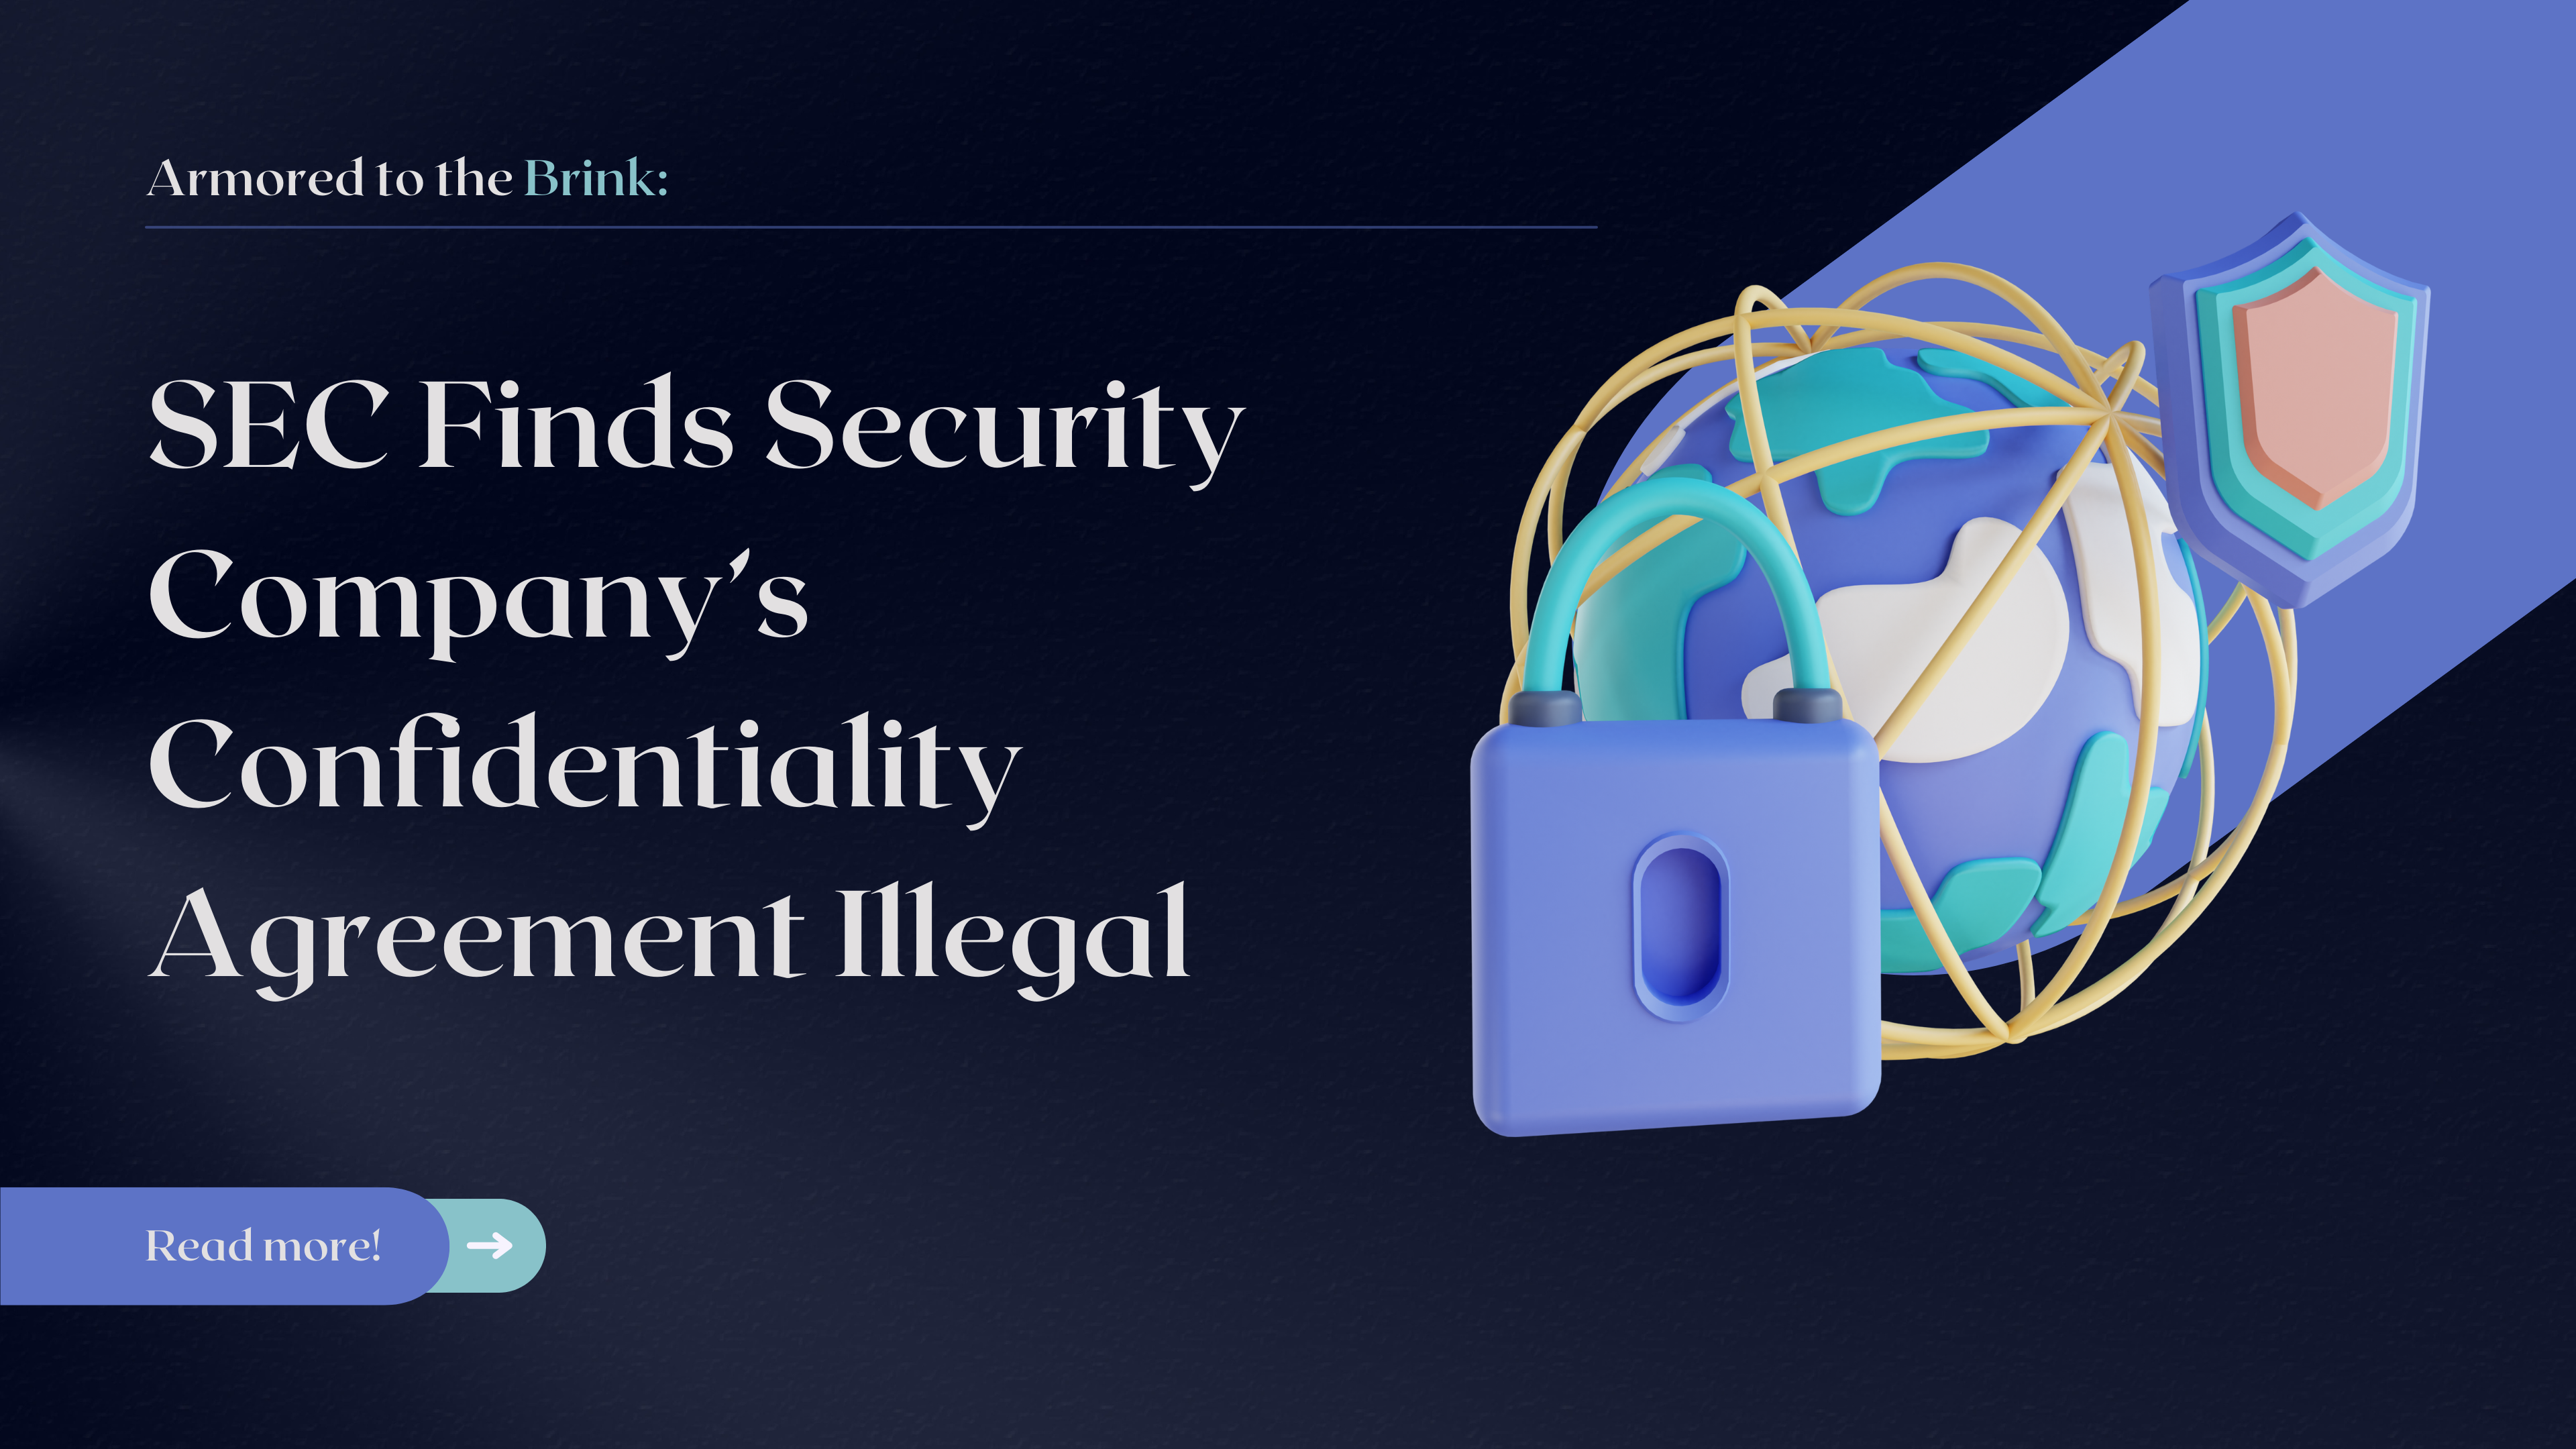 Armored to the Brink: SEC Finds Security Company’s Confidentiality Agreement Illegal